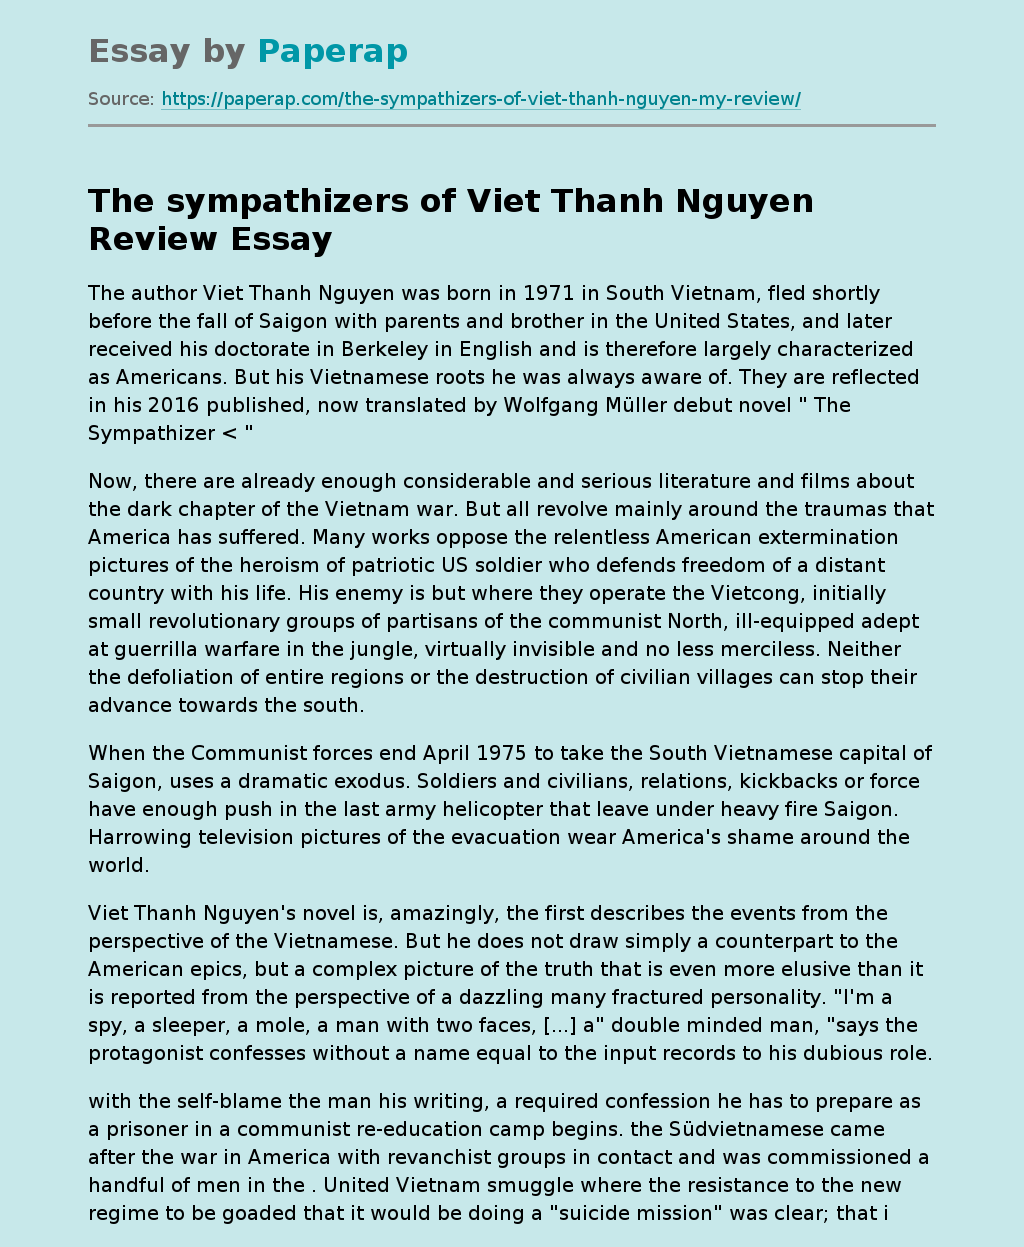 The sympathizers of Viet Thanh Nguyen Review